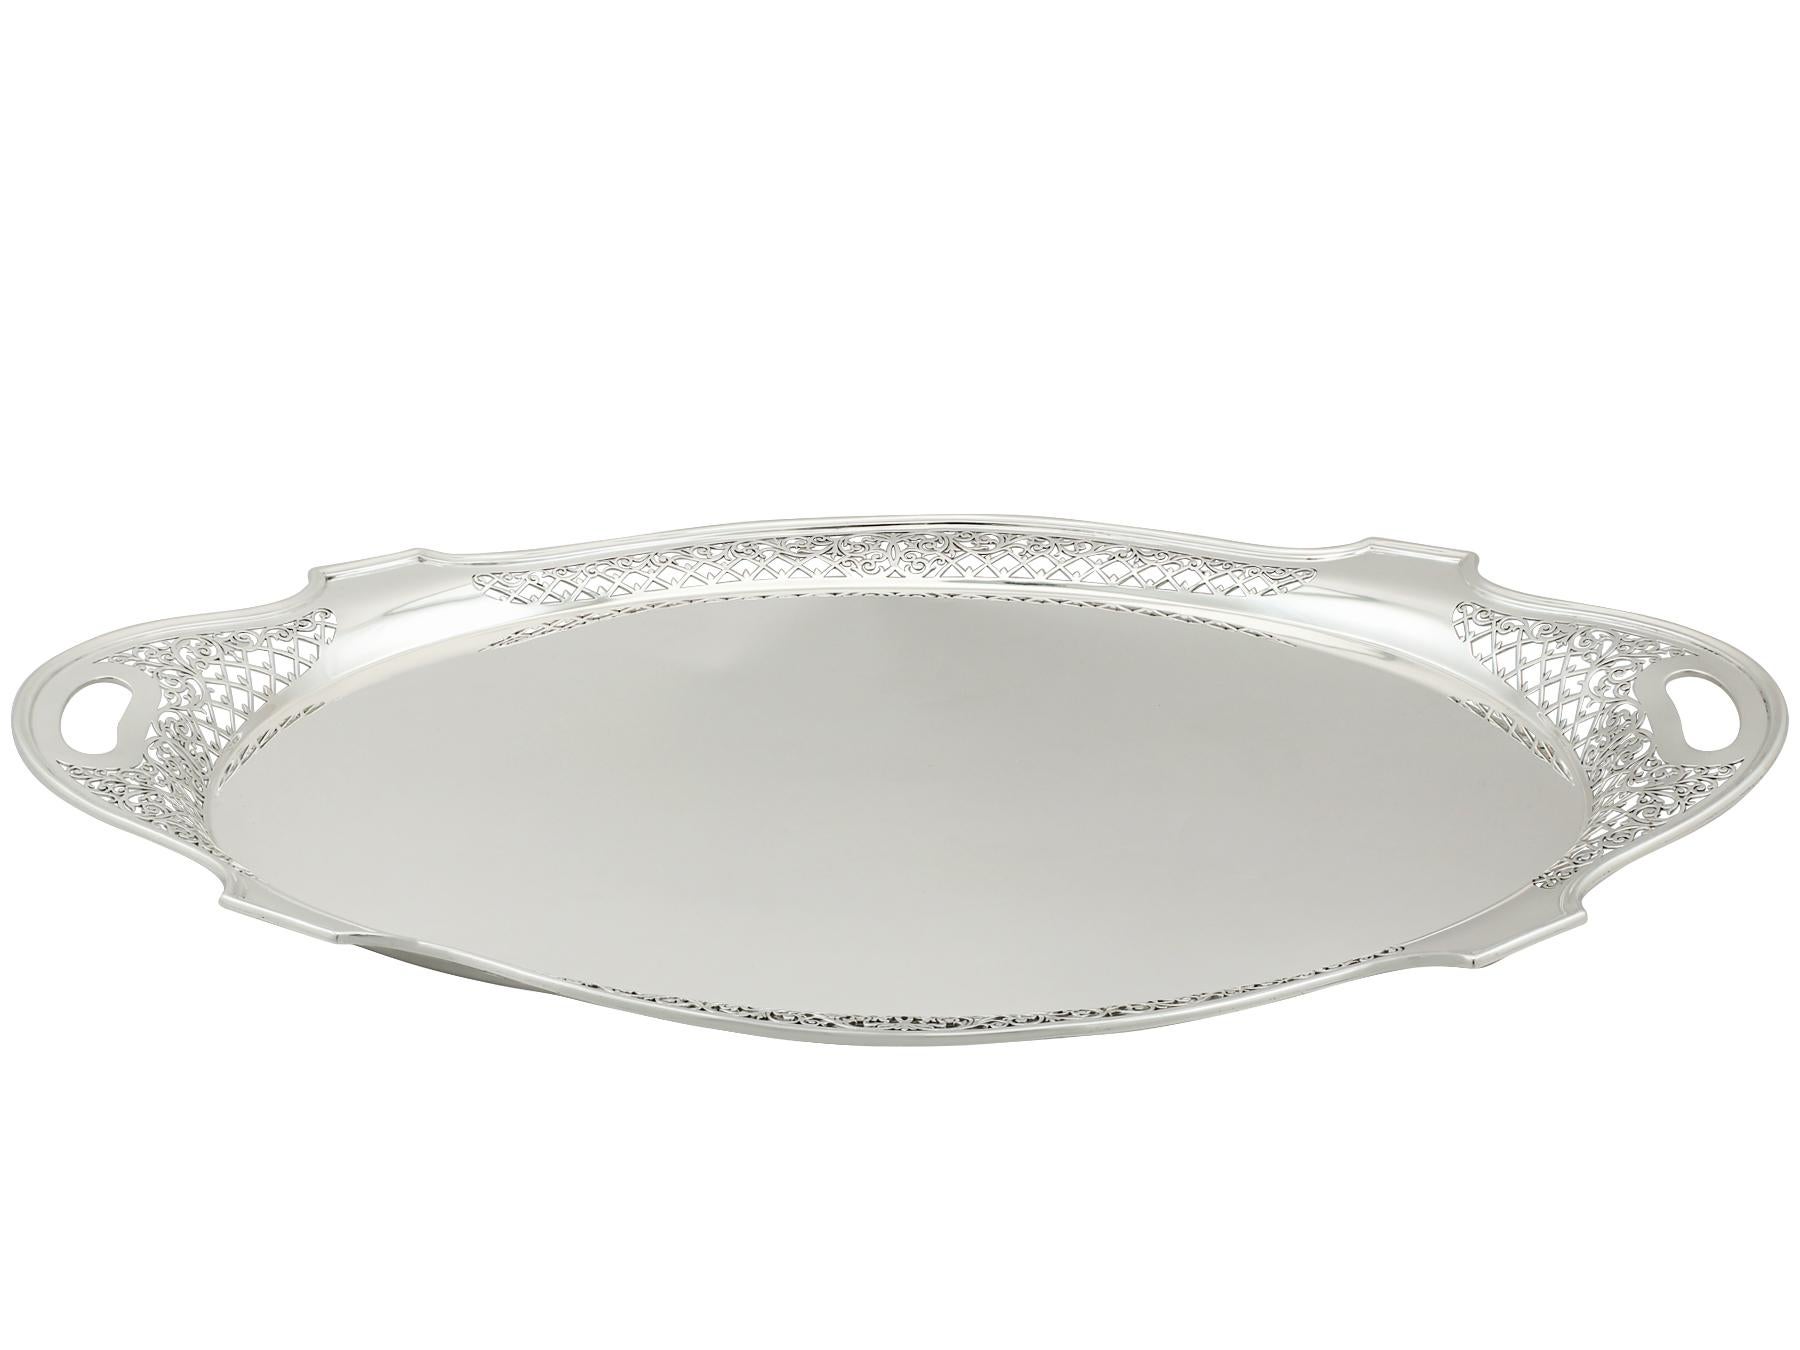 An exceptional, fine and impressive, antique George V English sterling silver tea tray; an addition to our silverware collection.

This exceptional antique George V sterling silver tray has an oval shaped form.

The surface of this antique tray